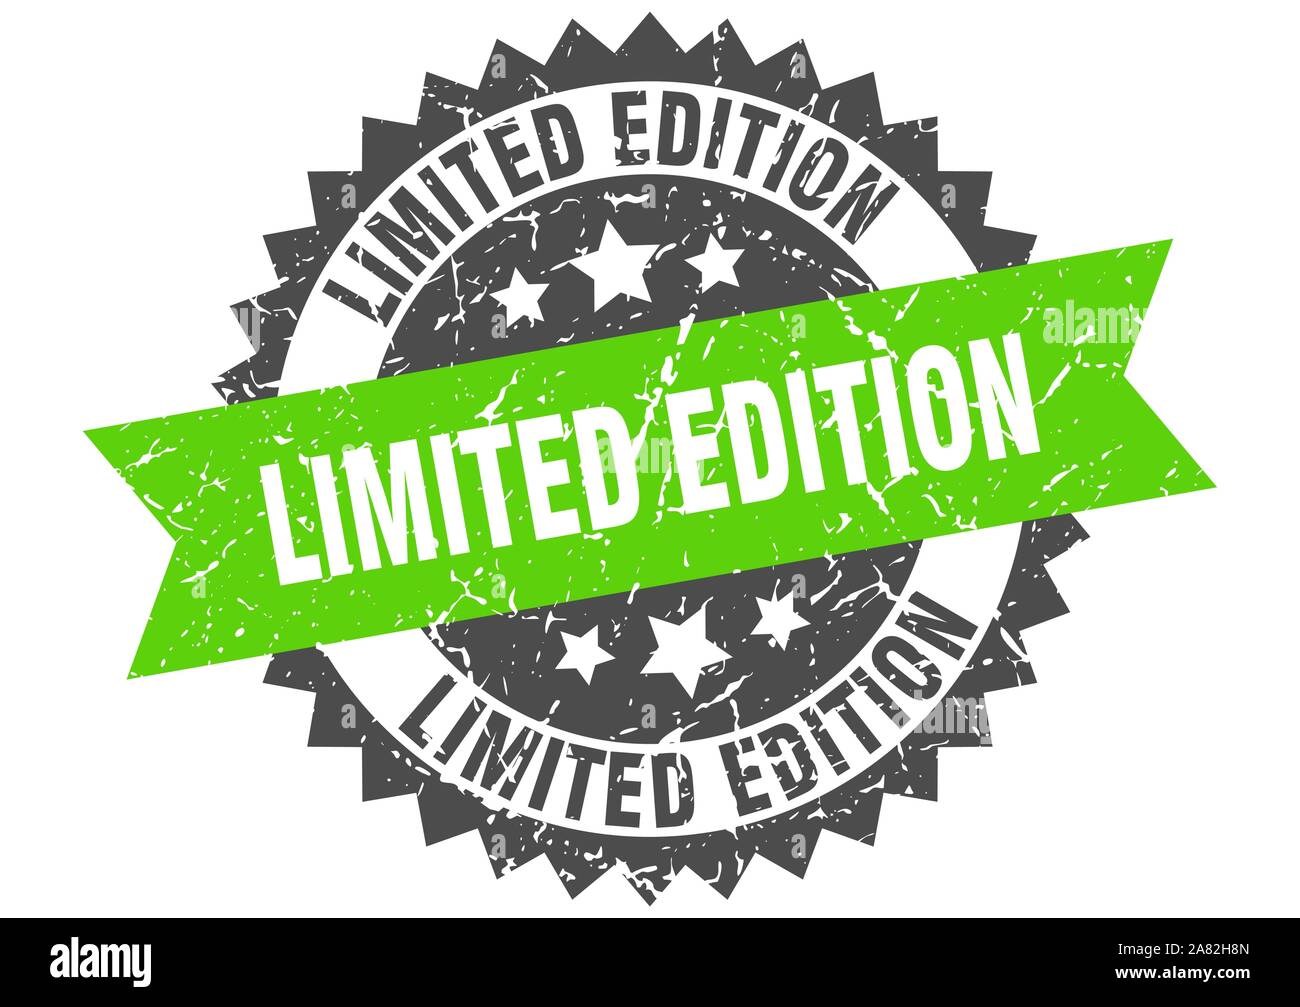 limited edition grunge stamp with green band. limited edition Stock Vector